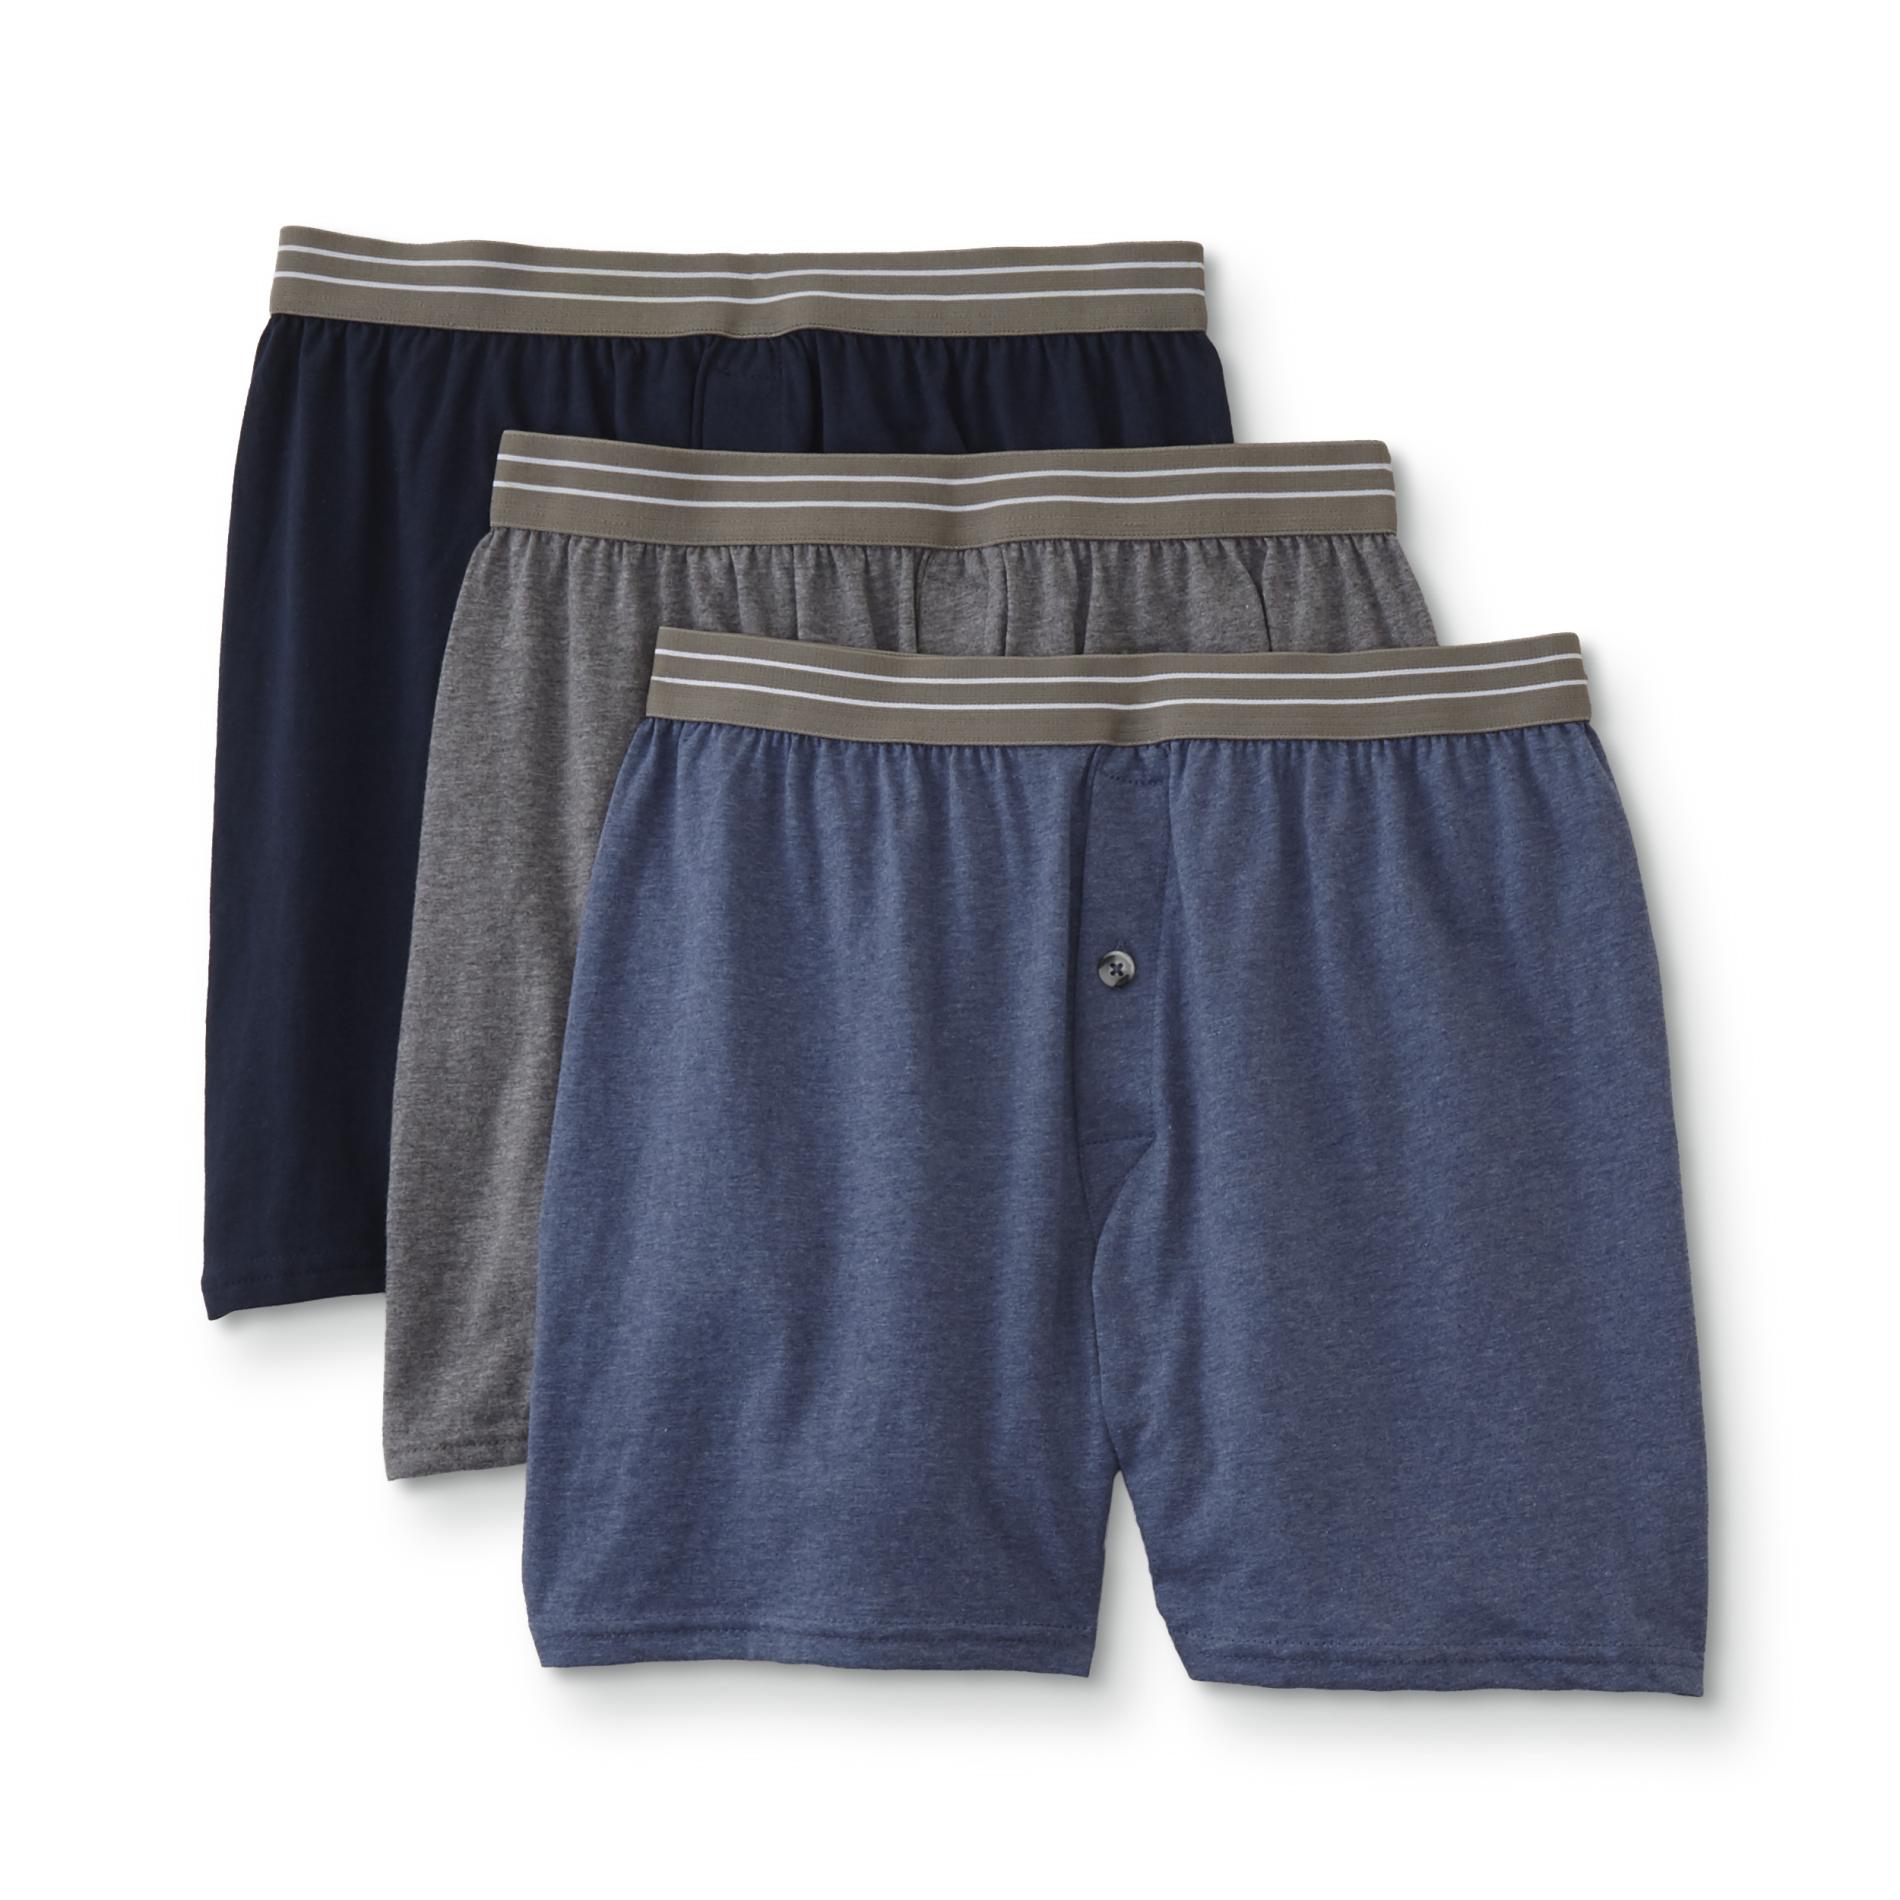 Simply Styled Men's Big & Tall  3-Pack Boxers